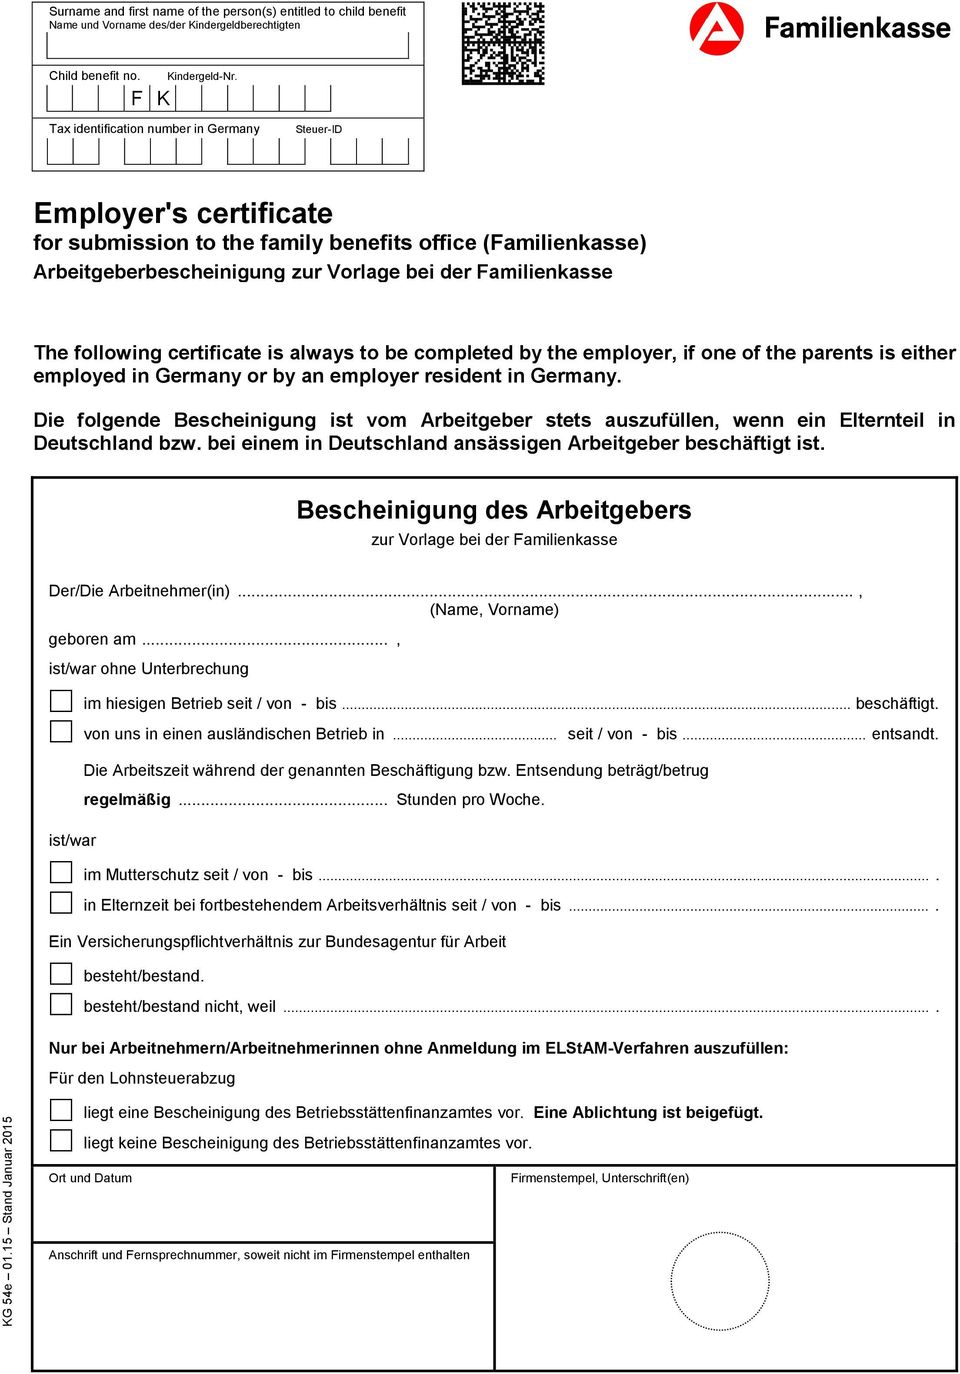 following certificate is always to be completed by the employer, if one of the parents is either employed in Germany or by an employer resident in Germany.